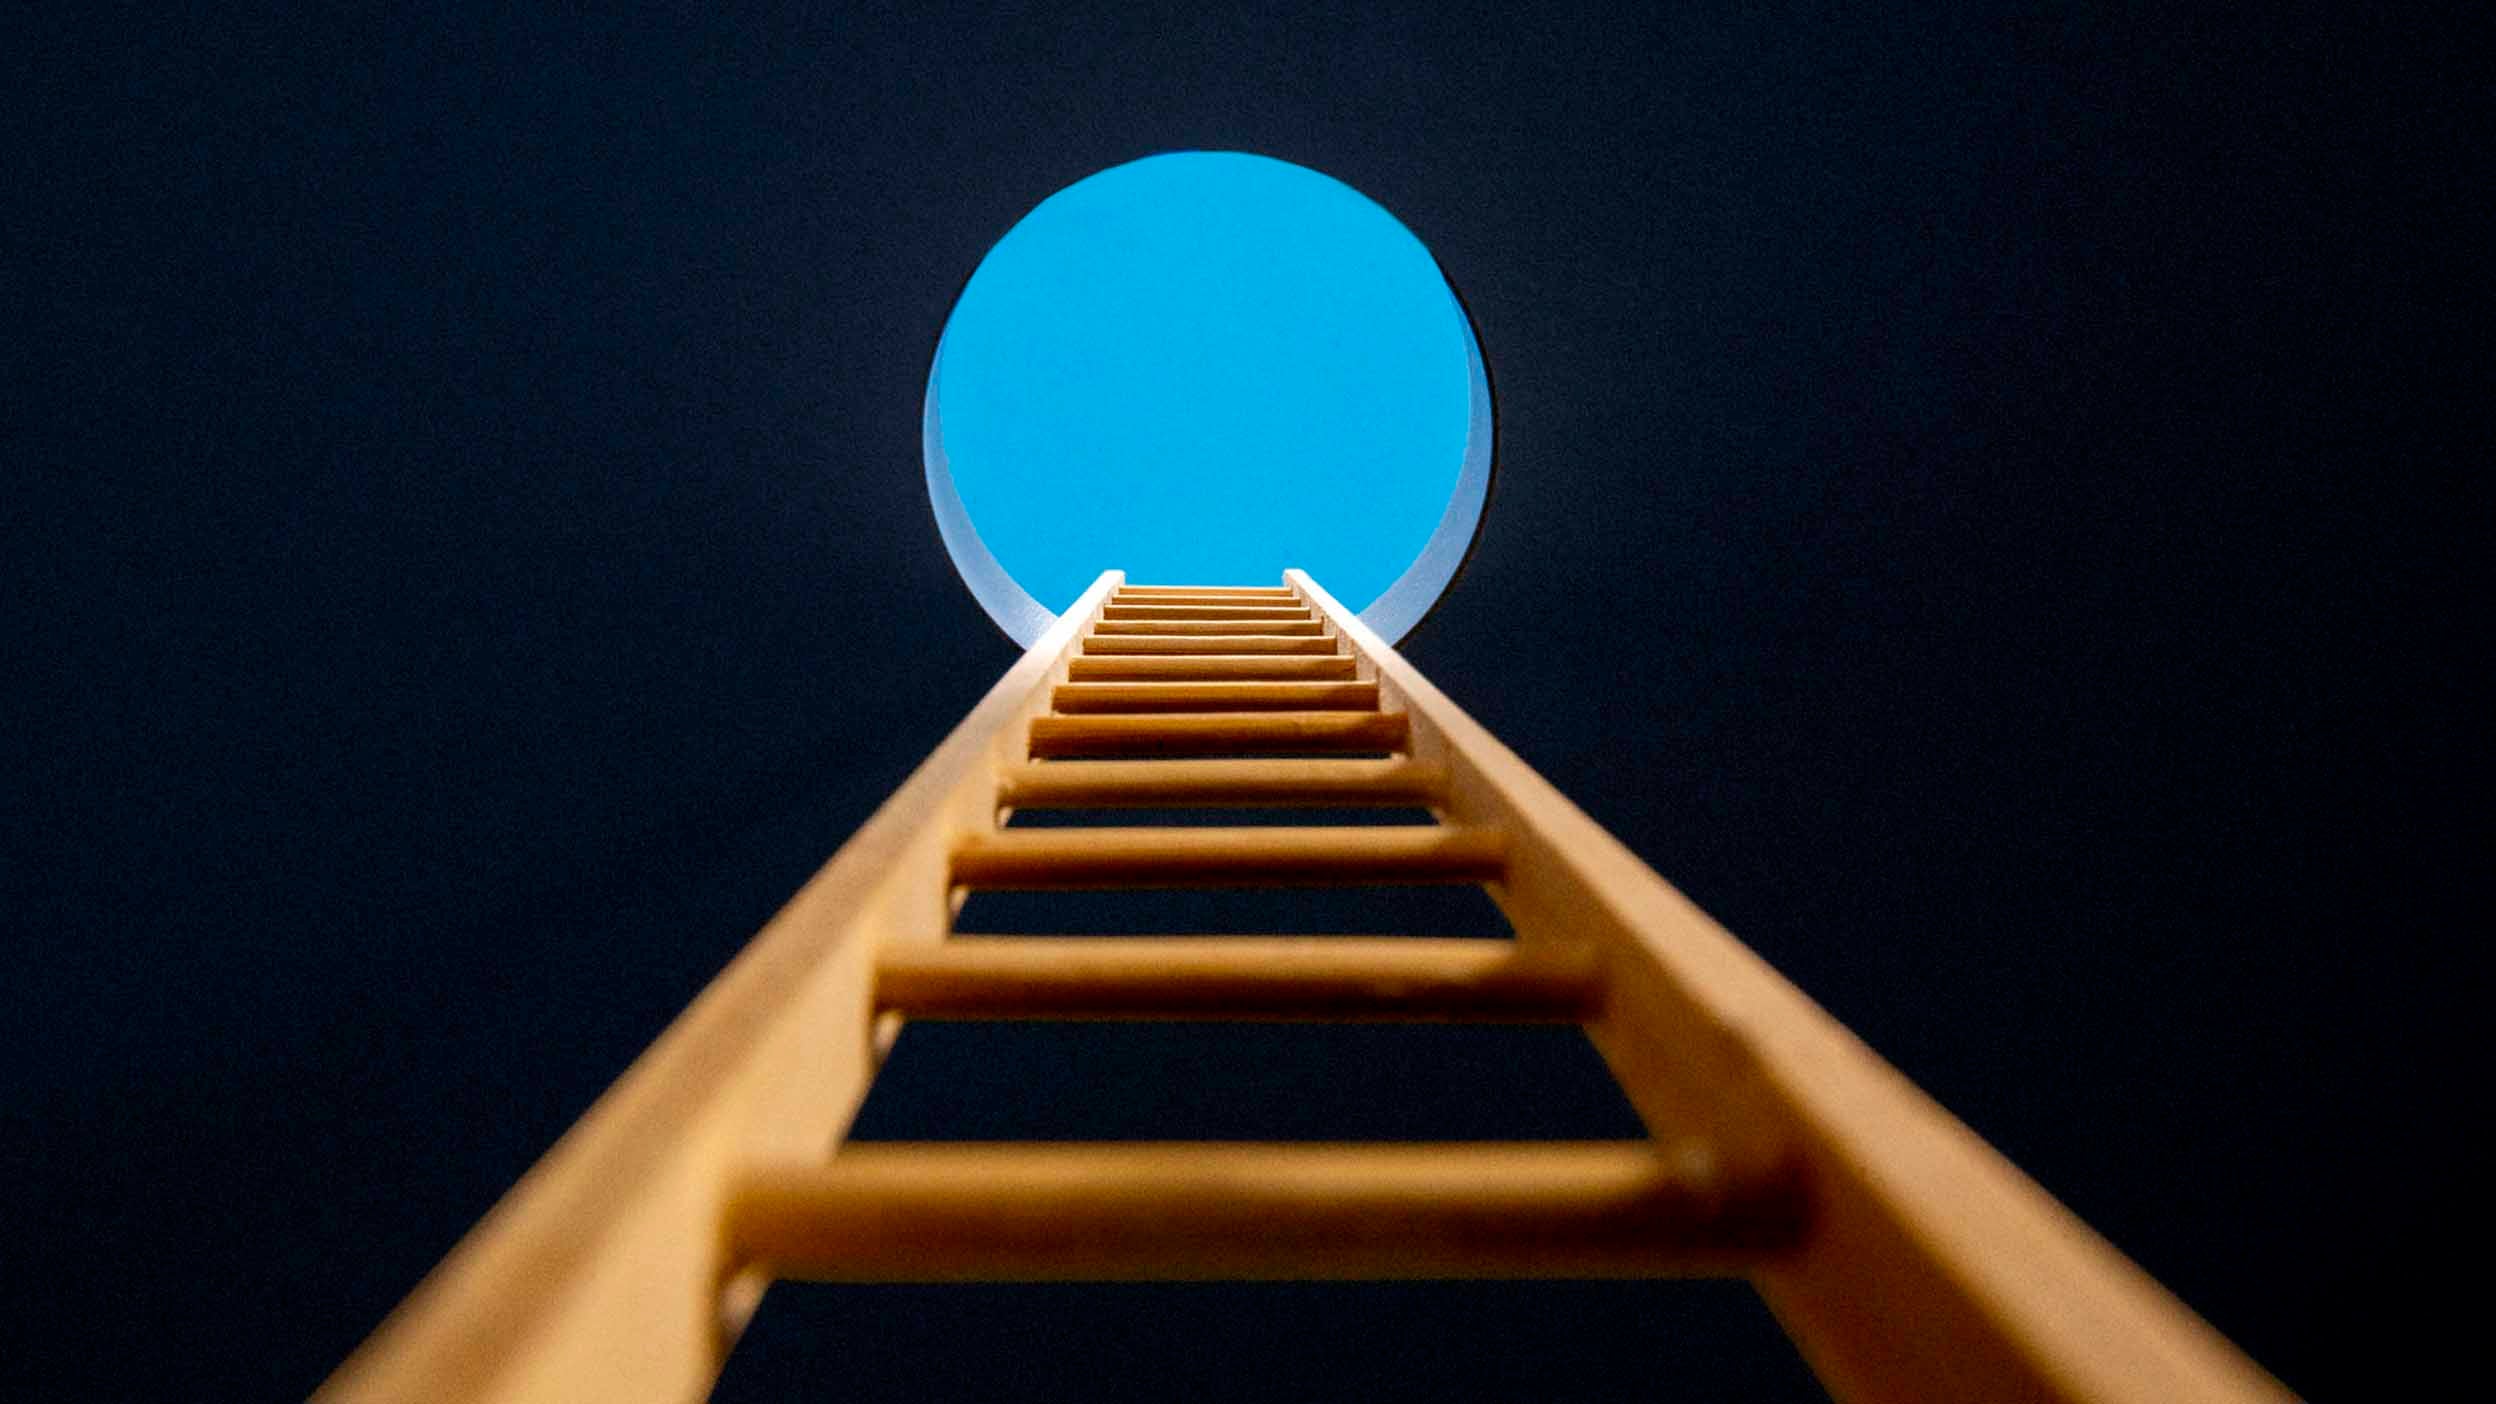 Point of view, looking up ladder sticking through hole in ceiling revealing blue sky